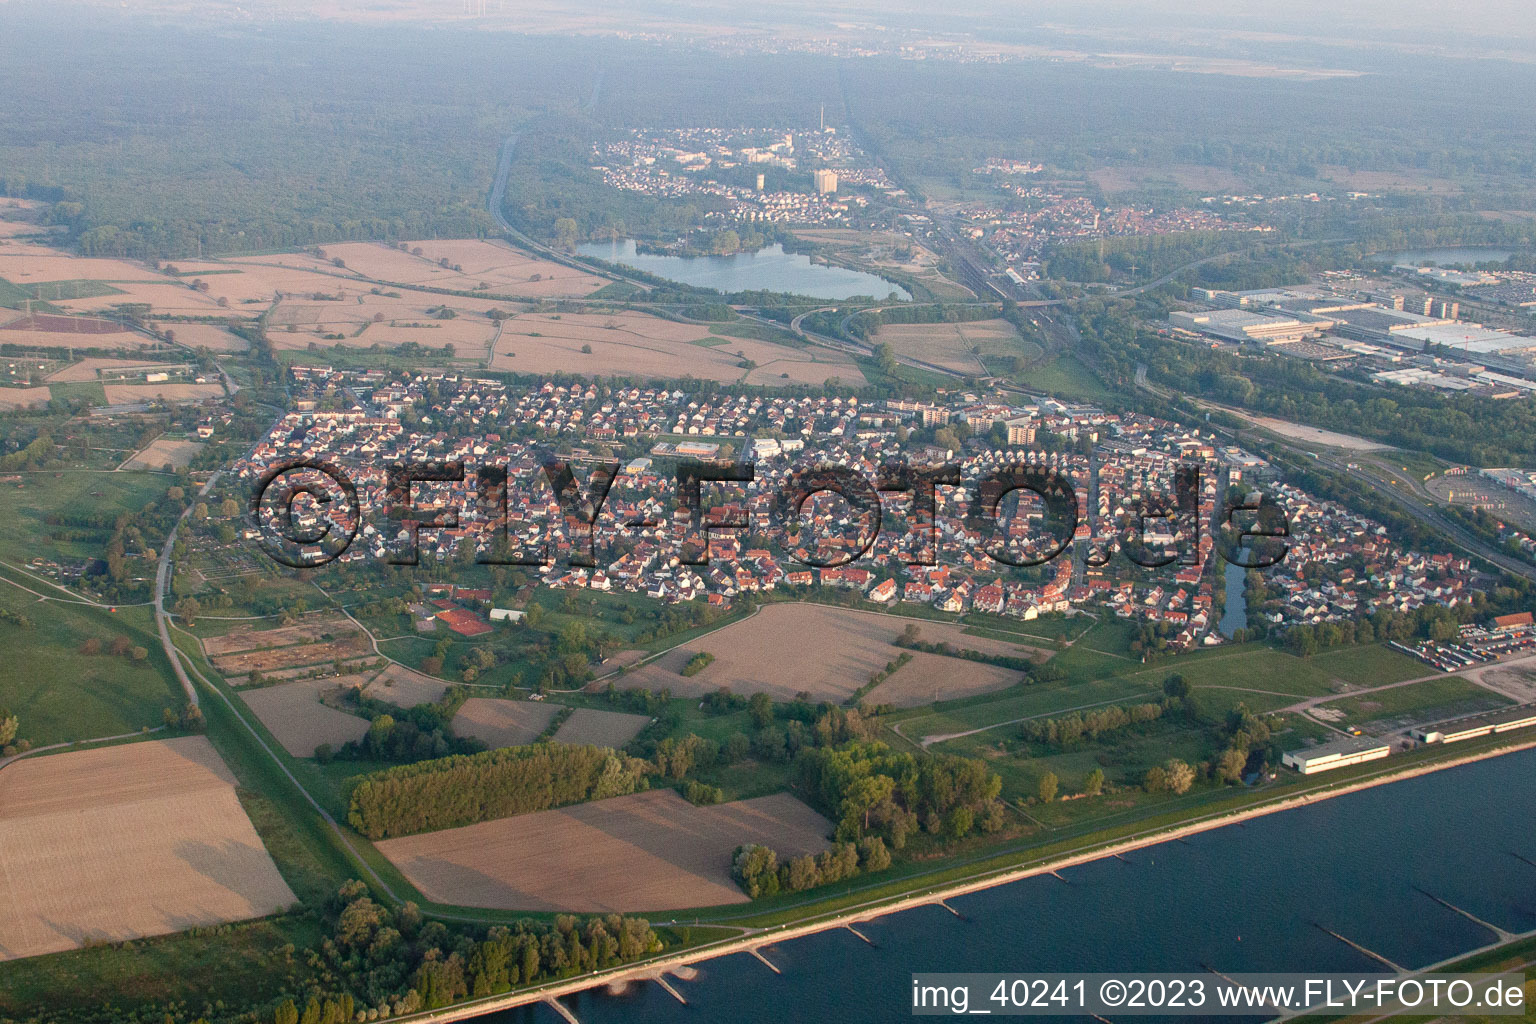 District Maximiliansau in Wörth am Rhein in the state Rhineland-Palatinate, Germany from the drone perspective